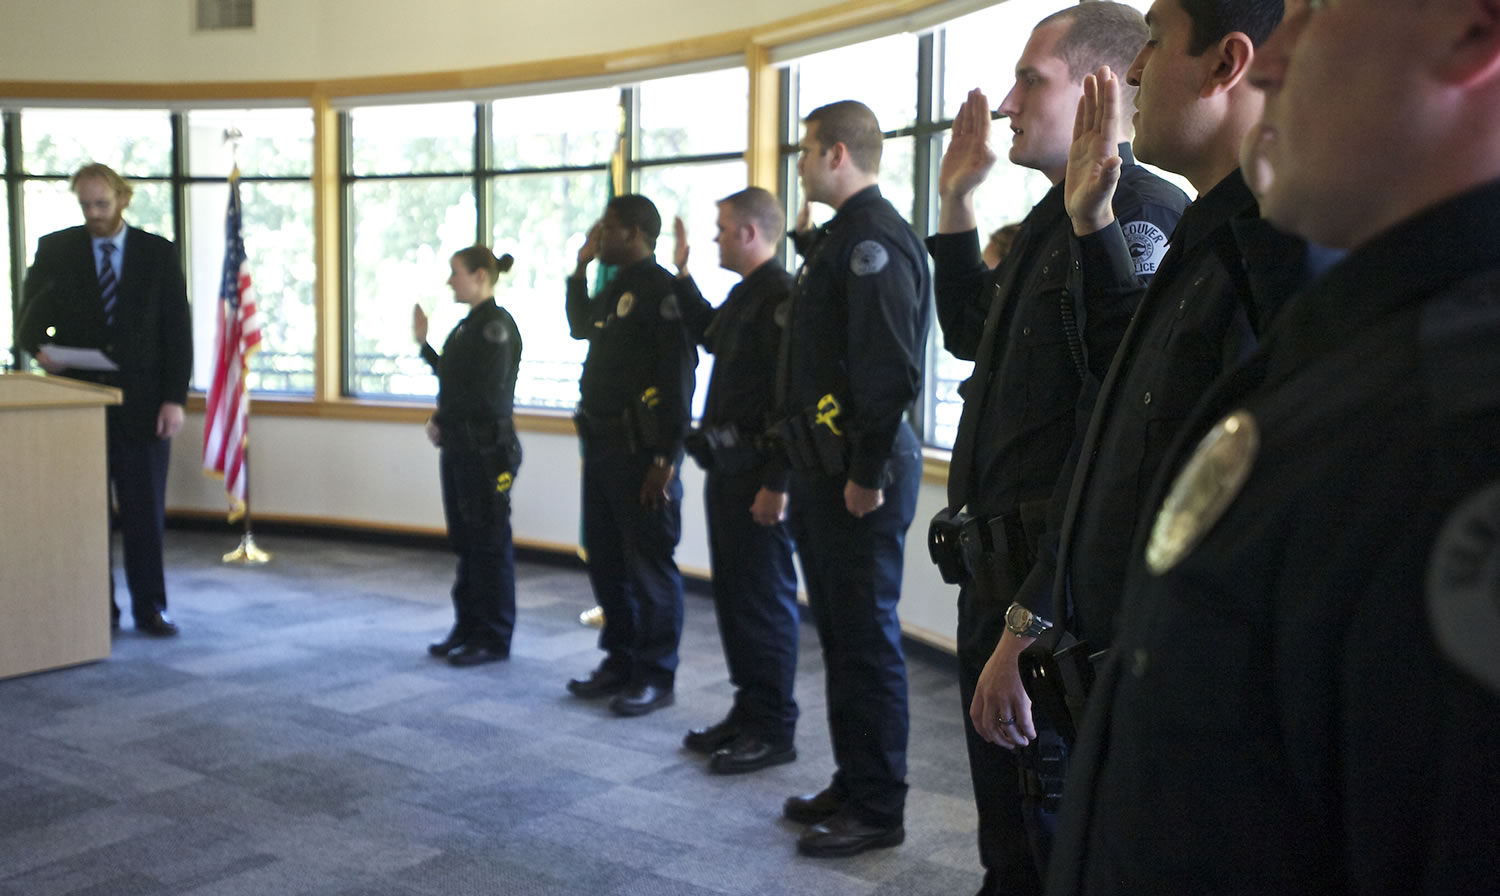 Eight new Vancouver Police officers are sworn in during a July 25 ceremony at the Water Resources Center.